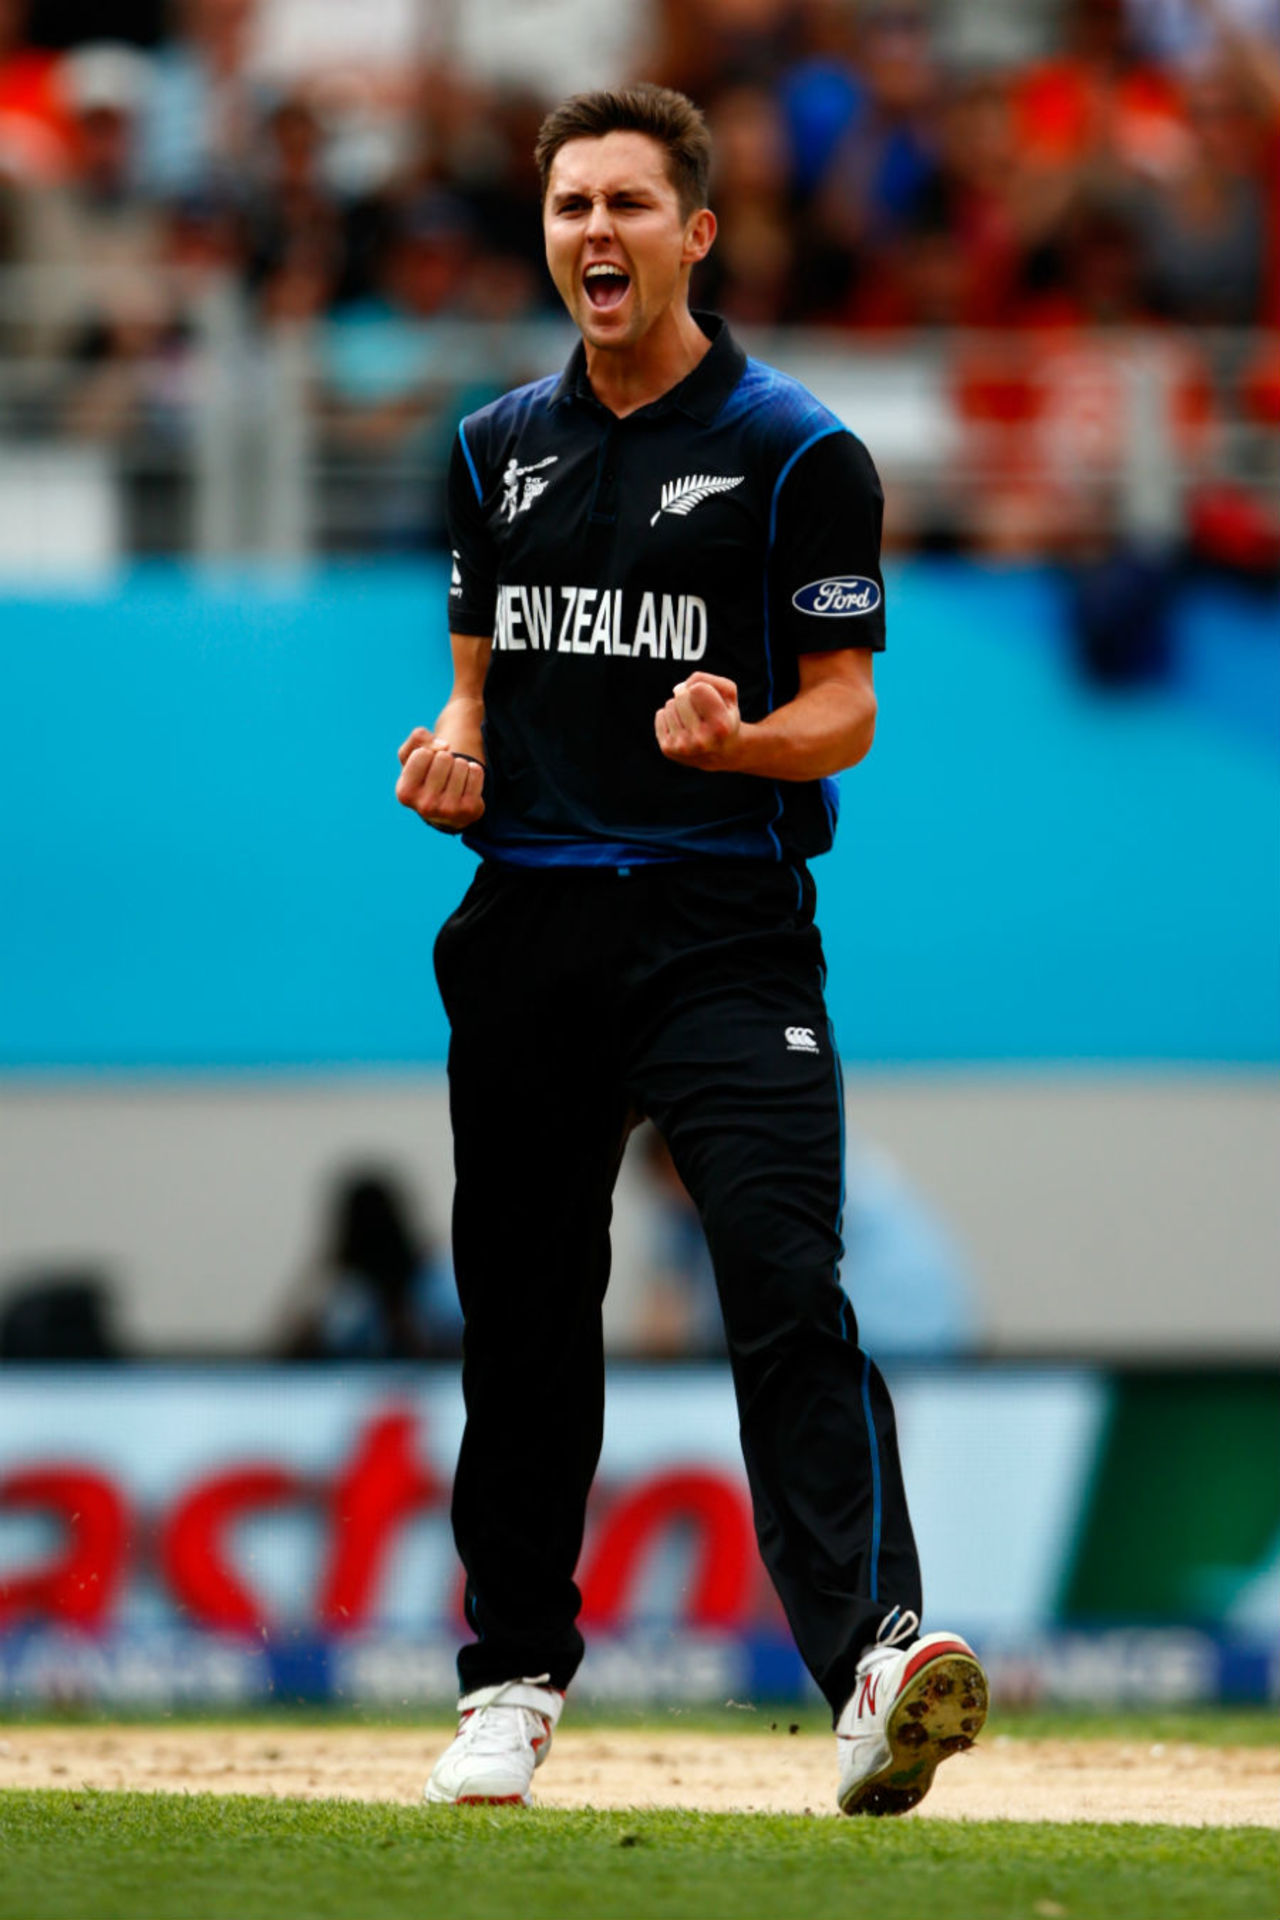 Trent Boult claimed the New Zealand record for most wickets in a World Cup, New Zealand v South Africa, World Cup 2015, 1st Semi-Final, Auckland, March 24, 2015